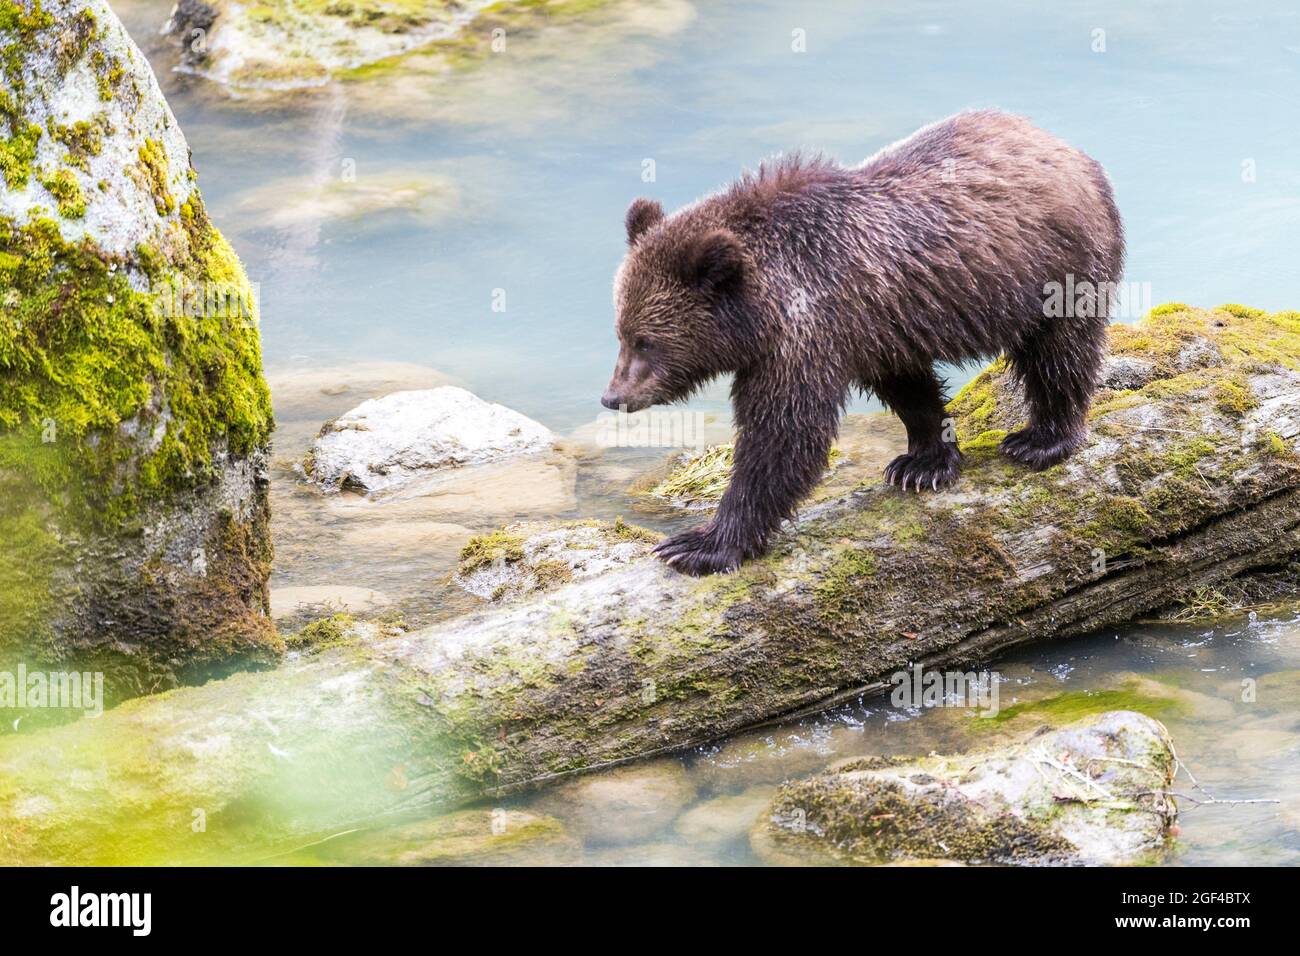 Grizzly bear cubs, Ursus arctos horribilis, and Grizzly mama bear fish for salmon in the Chilkoot River ,, Haines, Alaska, USA, without people. Stock Photo